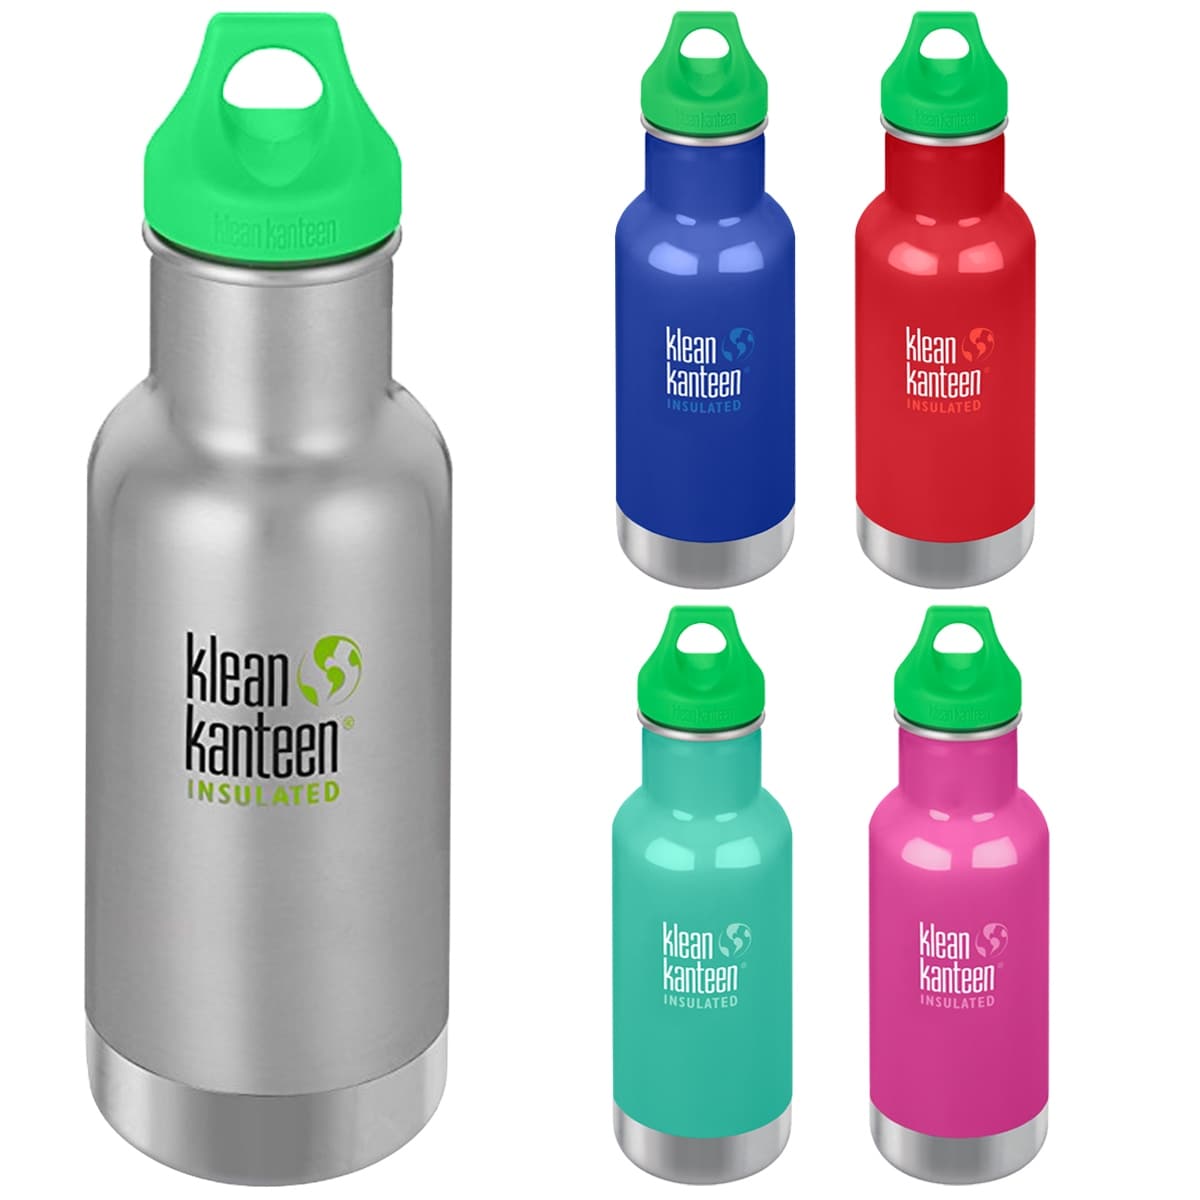 https://ak1.ostkcdn.com/images/products/is/images/direct/e60edbb921a0c5348dae0acaad2790bc12a62228/Klean-Kanteen-Kid-Classic-12-oz.-Insulated-Bottle-with-Loop-Cap.jpg